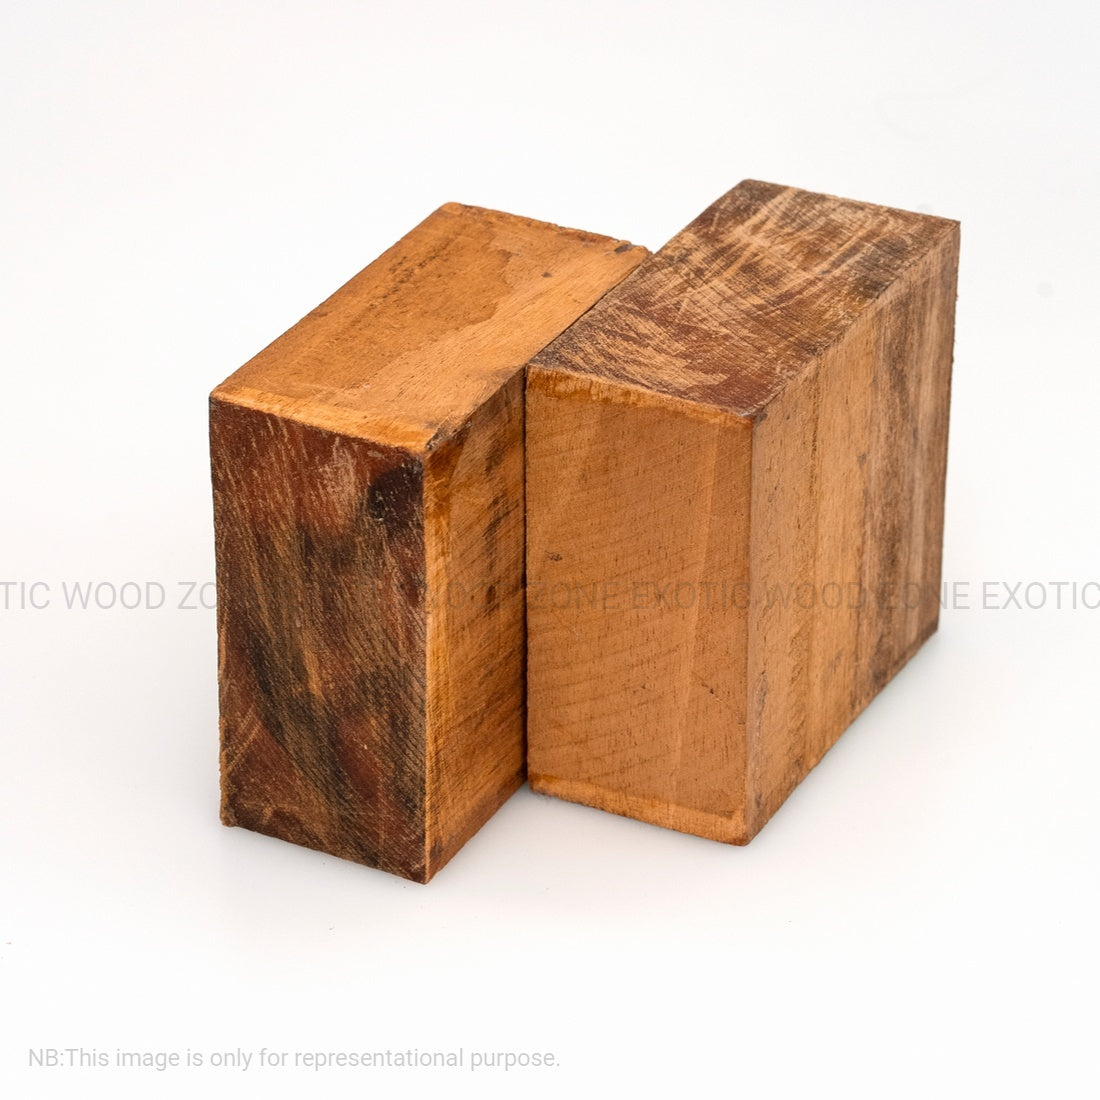 African Mahogany Wood Bowl Blanks - Exotic Wood Zone - Buy online Across USA 